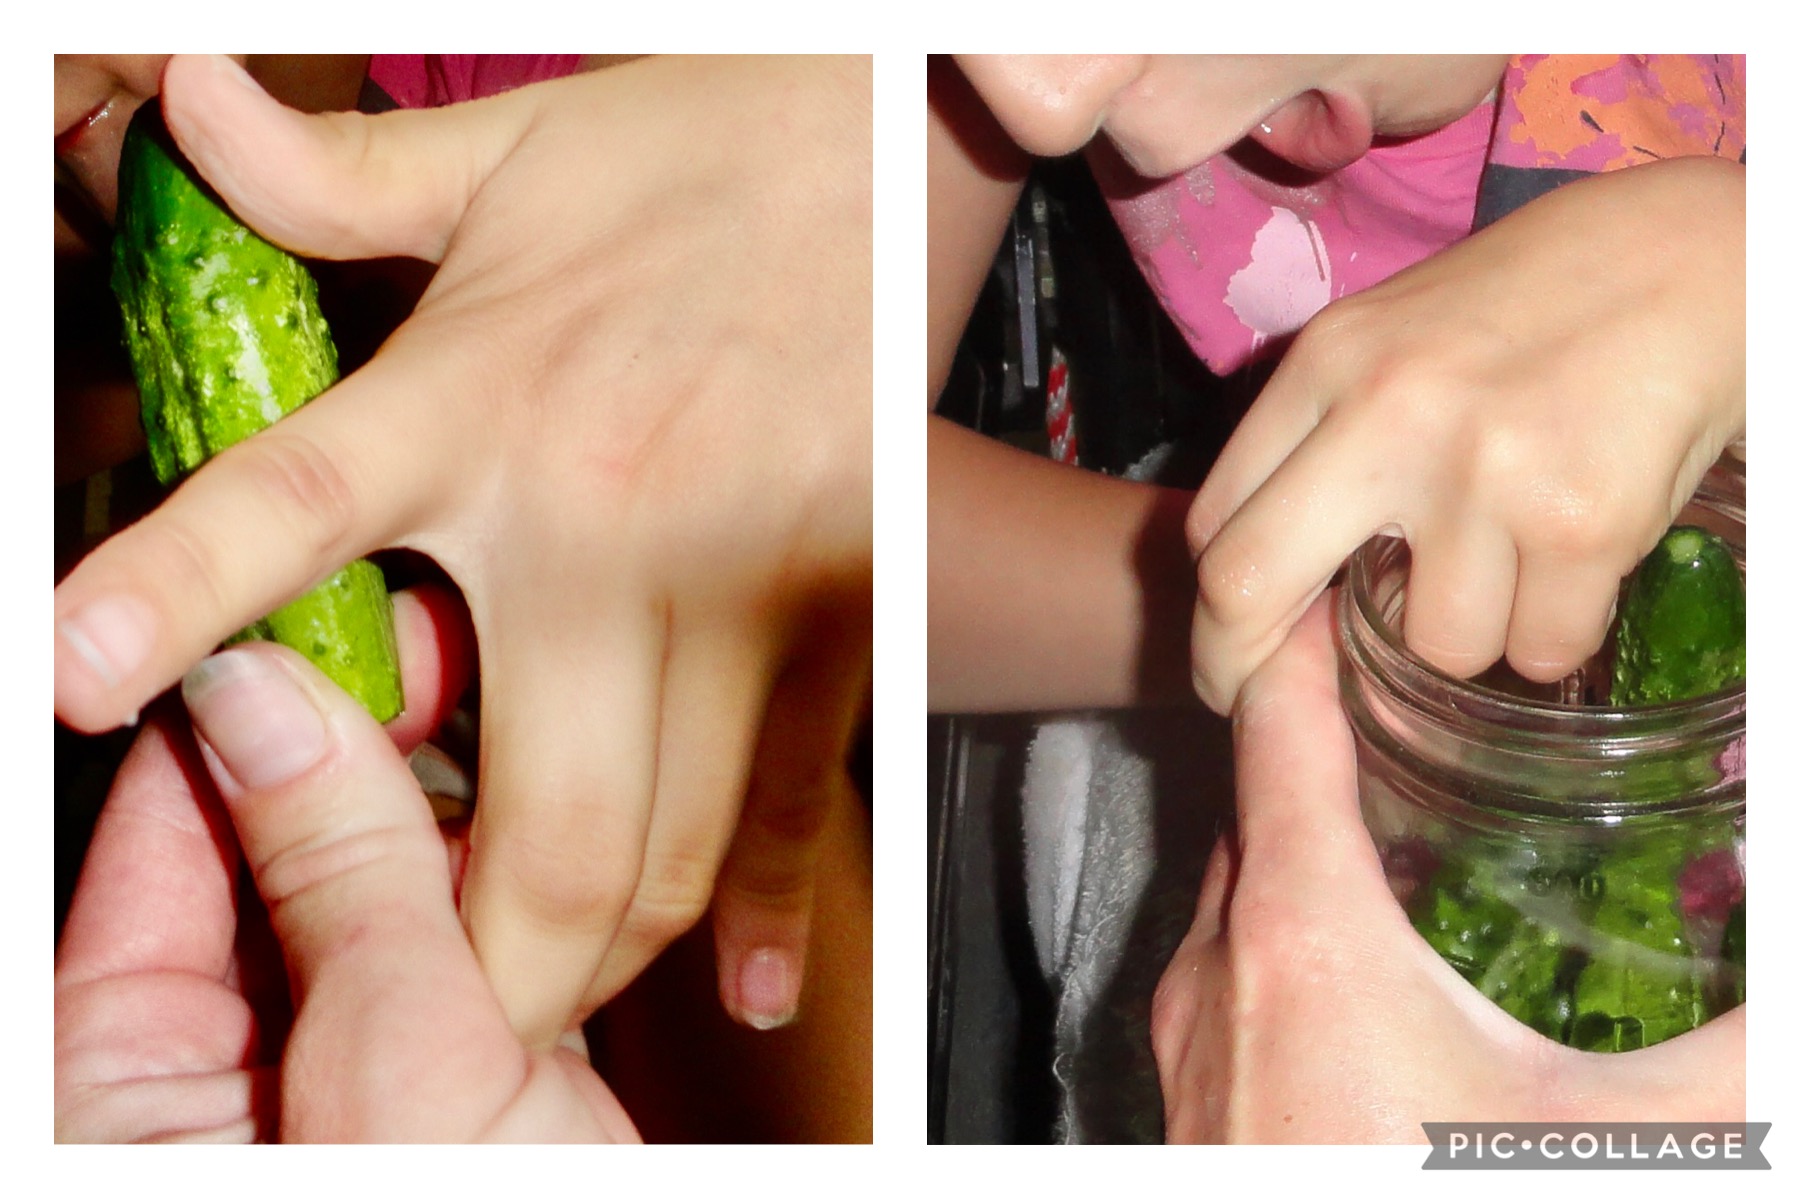 Image shows a pic collage of a child grabbing a small cucumber and then putting it into a jar to make pickles.